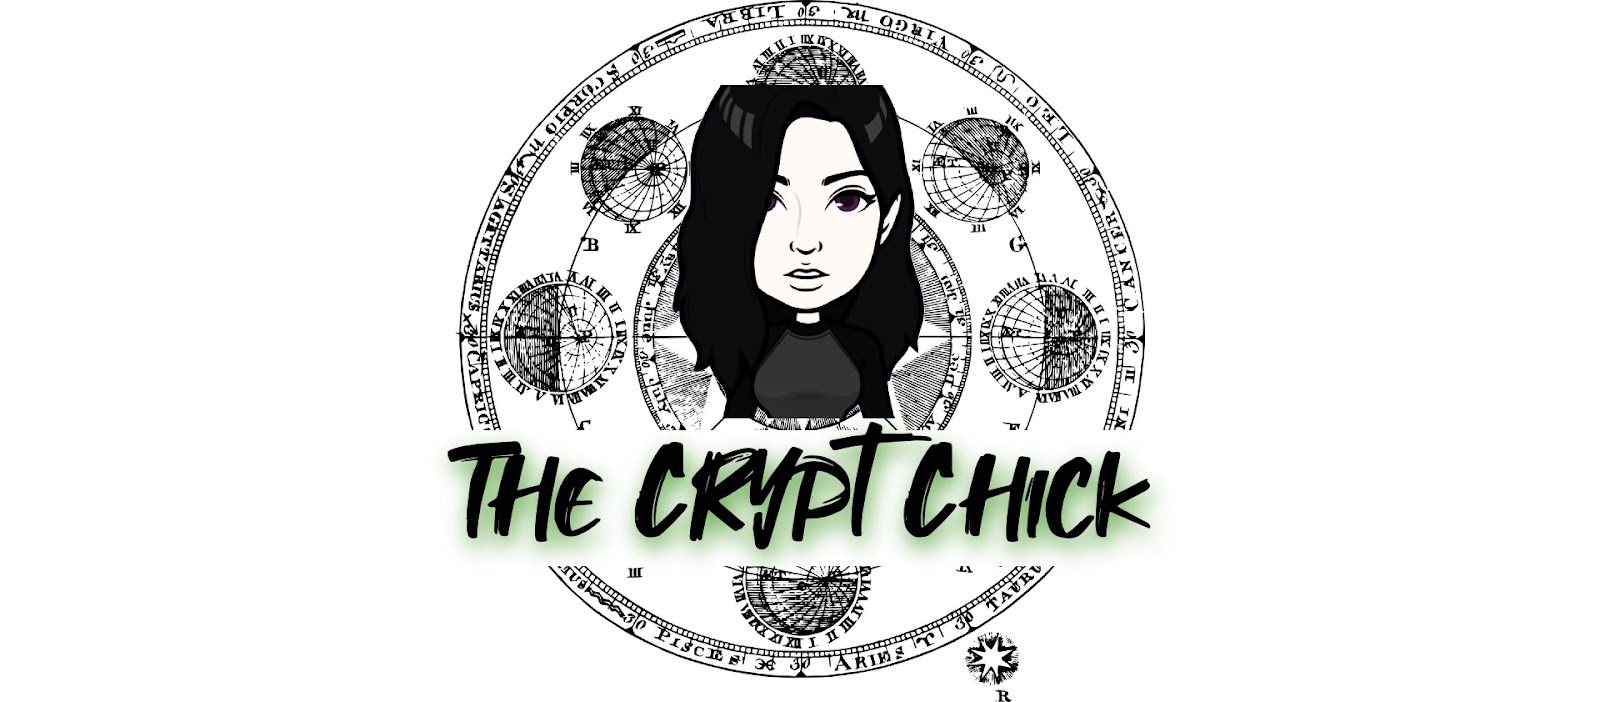 The Crypt Chick